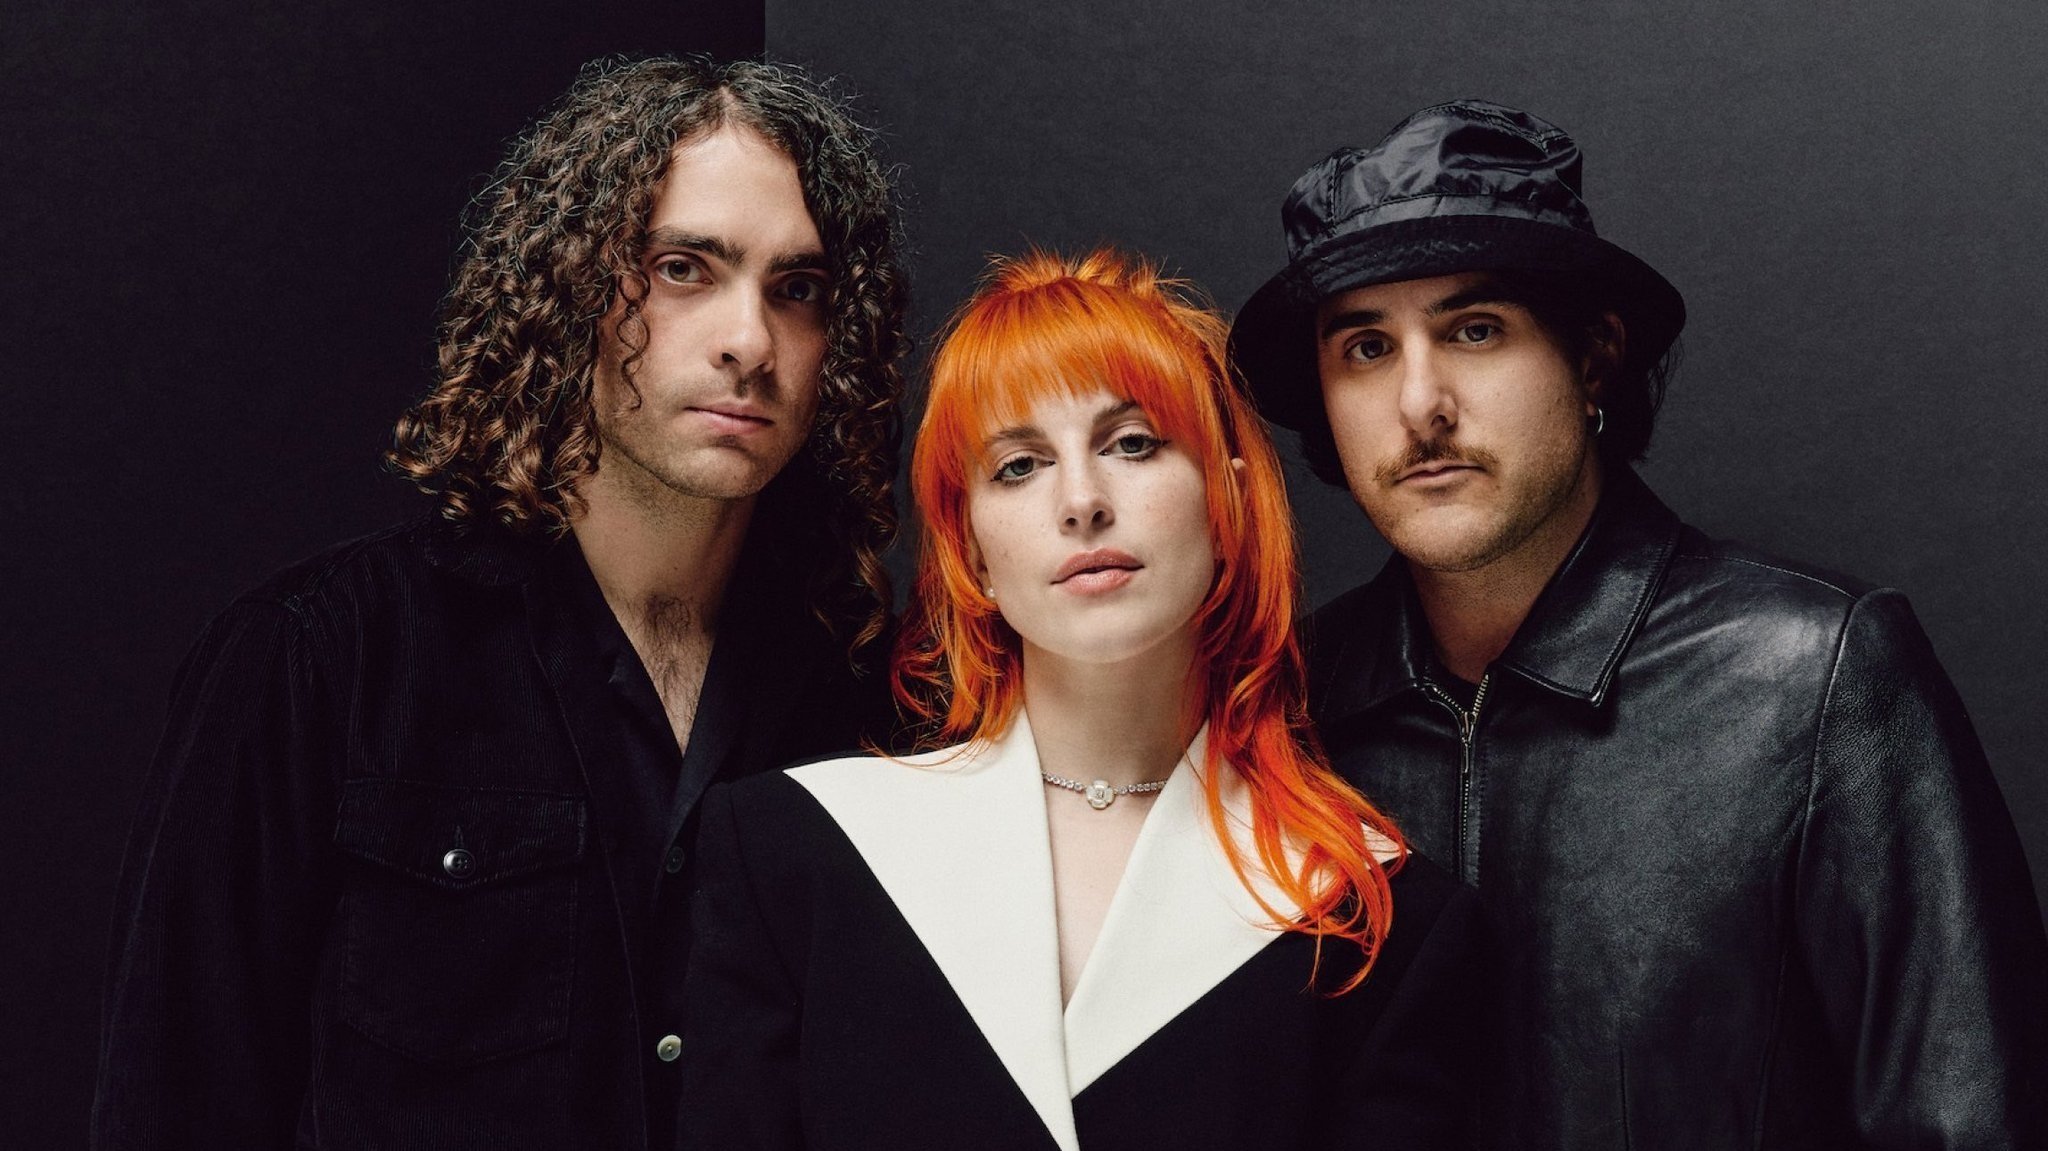 Paramore Announce “This Is Why,” First New Song in 5 Years